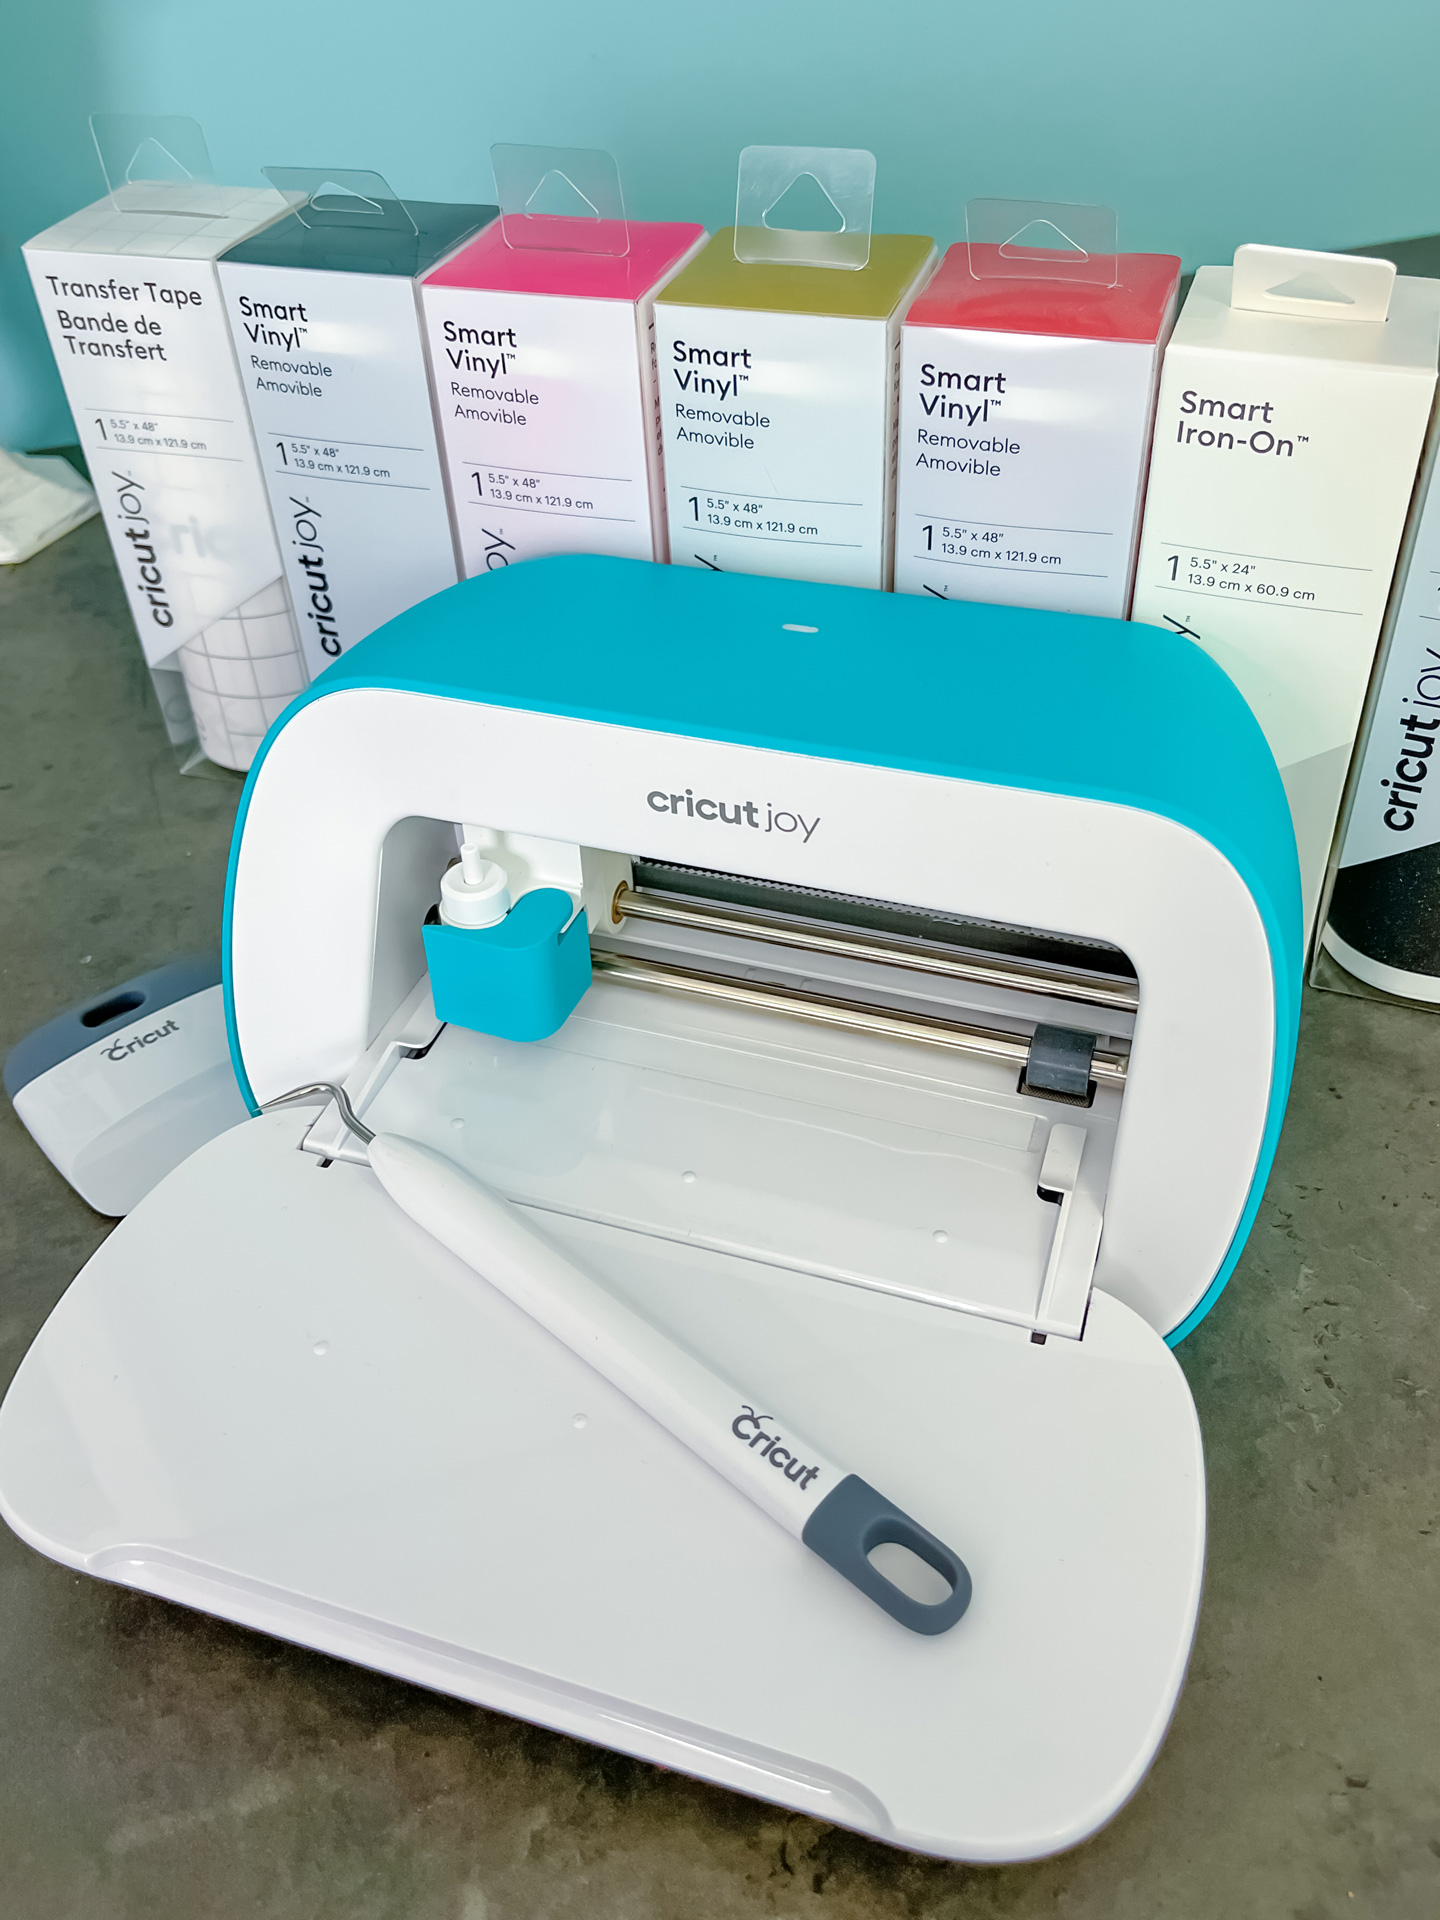 The 5 Different Ways You Can Make Labels with a Cricut Machine - The Homes  I Have Made